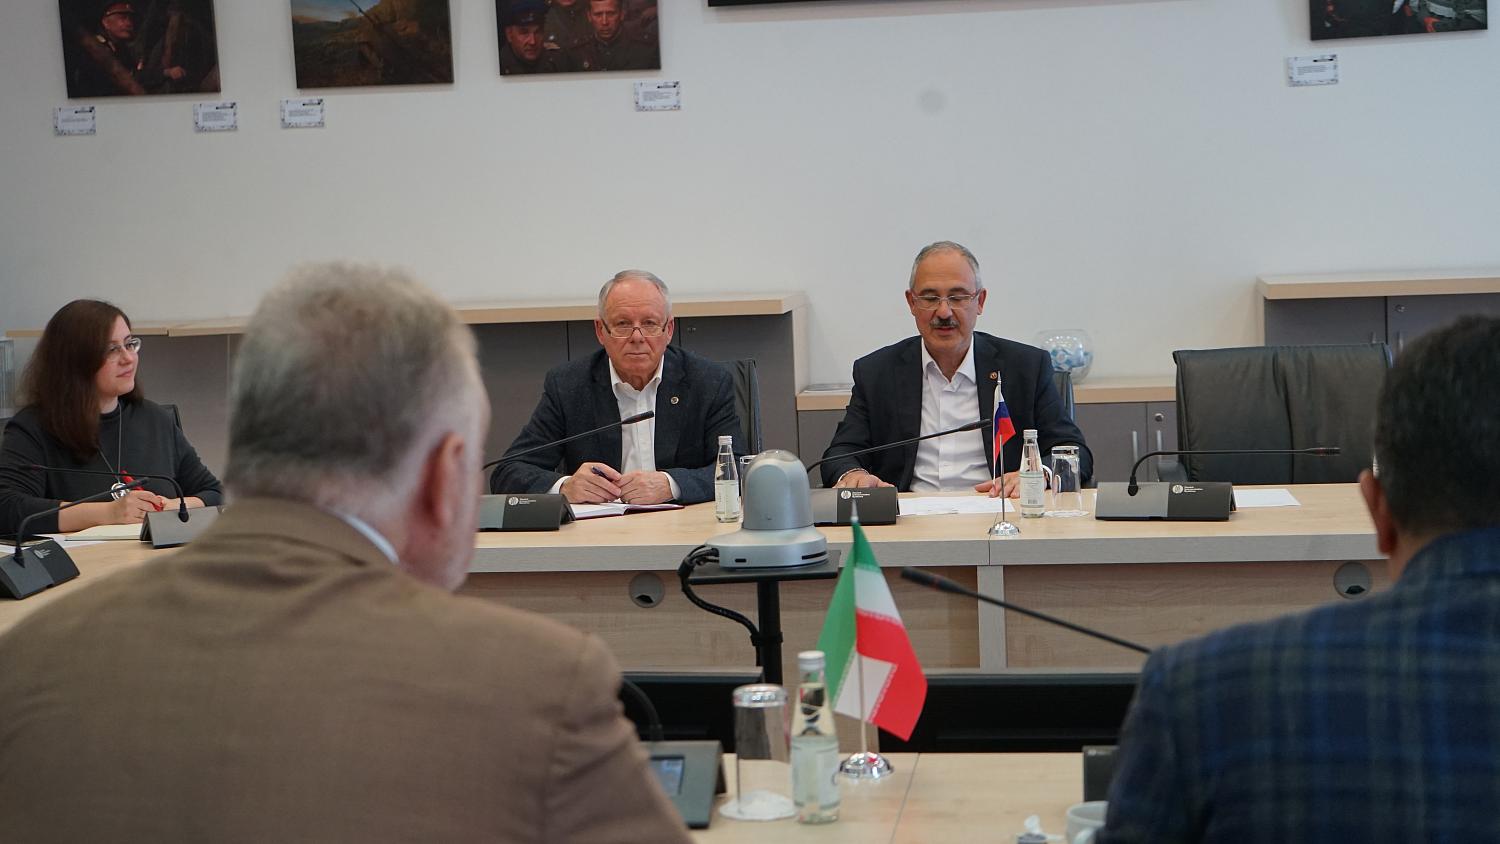 A delegation from the Islamic Republic of Iran visited the Moscow Chamber of Commerce and Industry